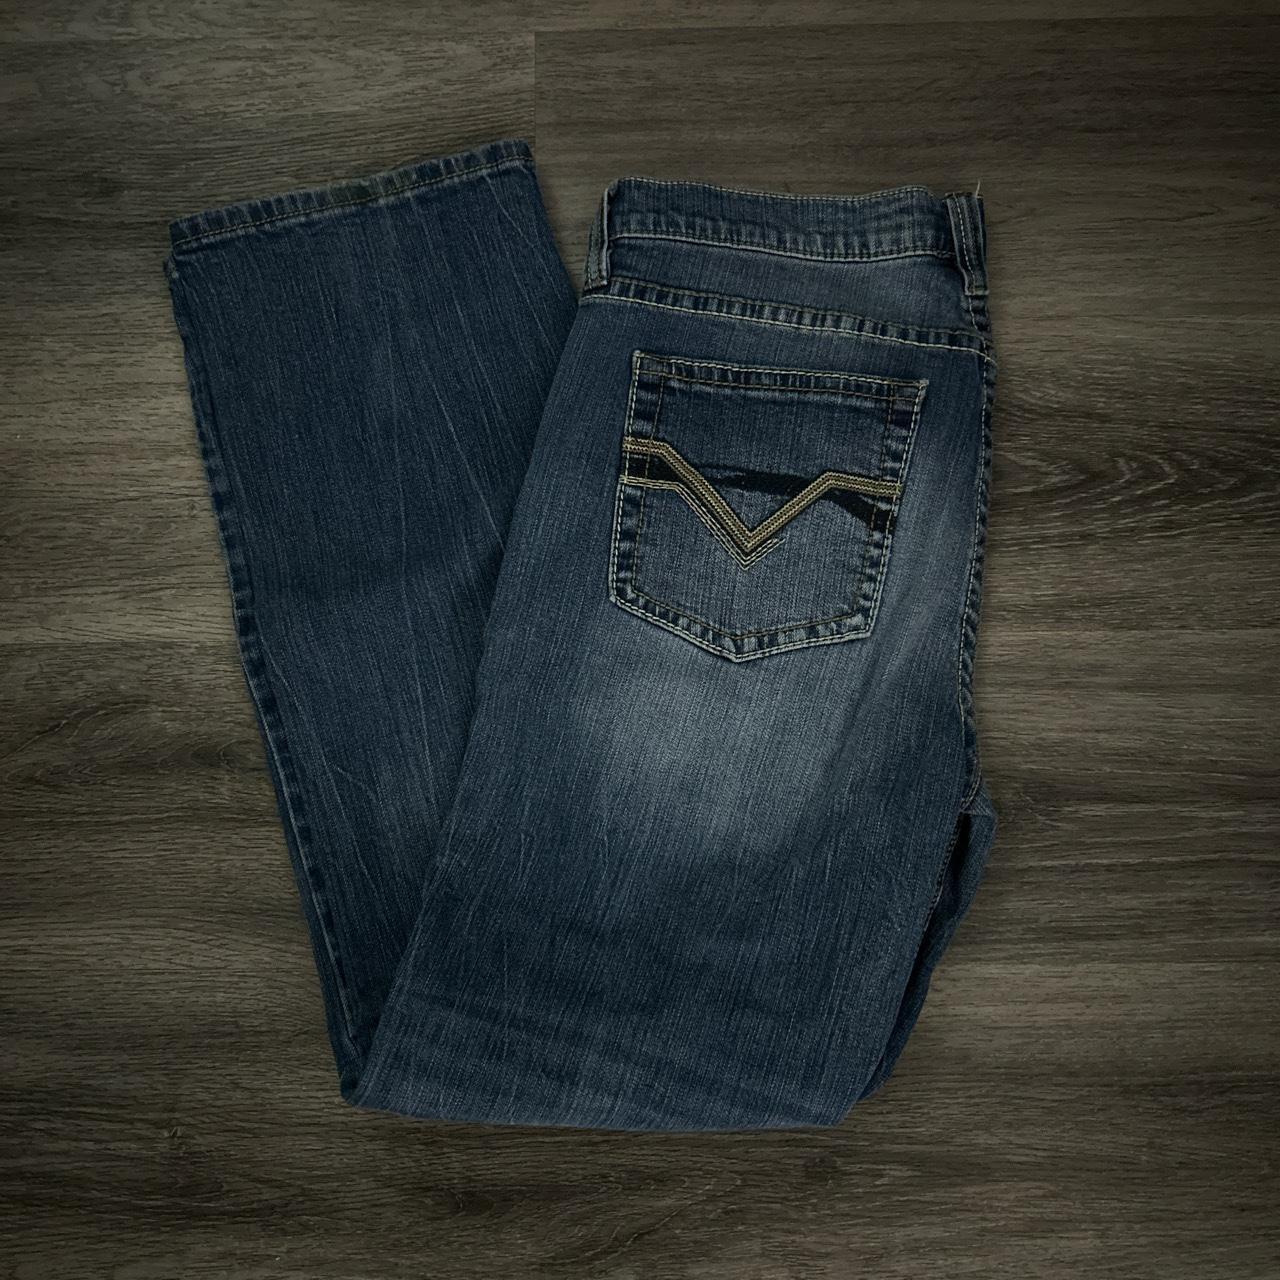 Cody James Men's Navy and Grey Jeans